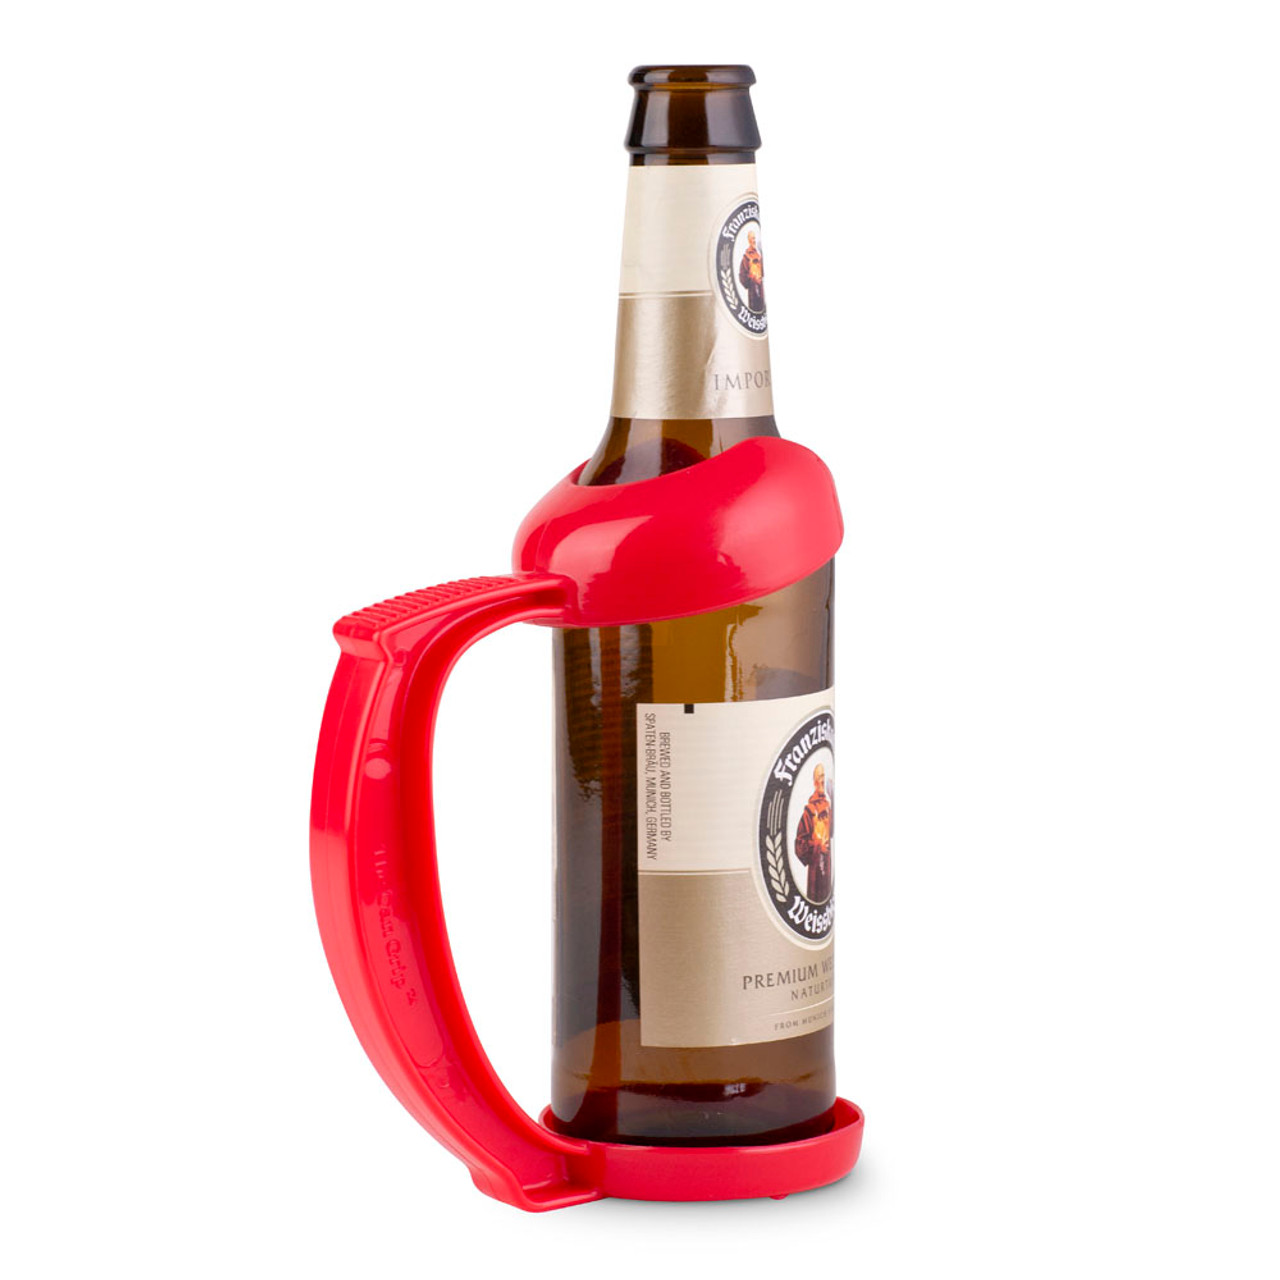 Hide A Beer Bottle Holder Beer Can Cooler Cozy Stainless Steel Insulated  Bottle